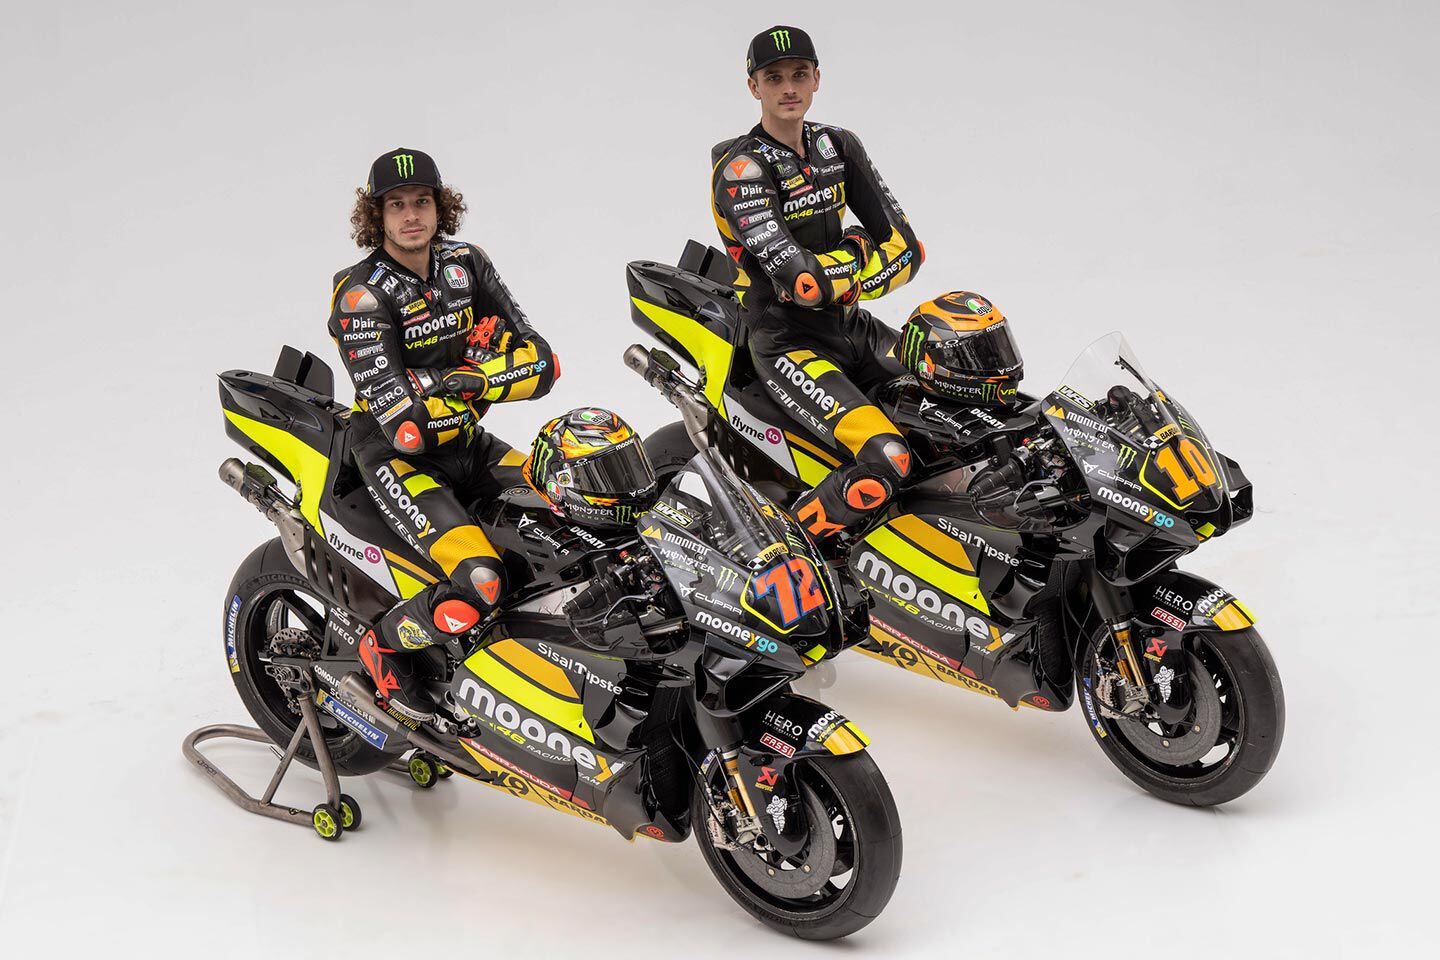 Marco Bezzecchi and Luca Marini might have different personalities and styles but both are the right fit for the Mooney VR46 Racing Team.